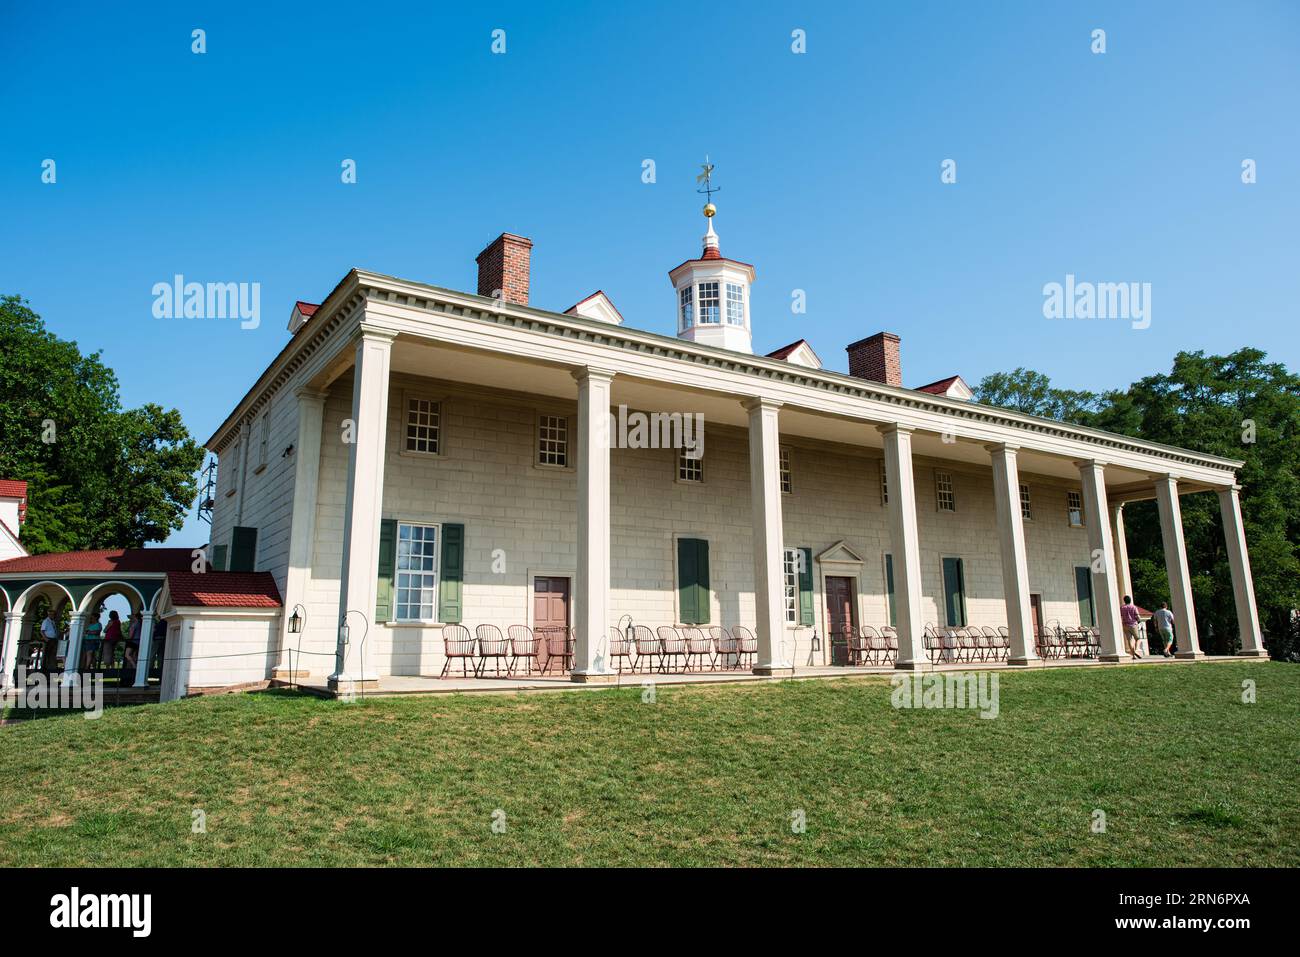 MT VERNON, Alexandria, VA — The historic home of George Washington, the first President of the United States, stands preserved in Alexandria. This iconic estate showcases the life and legacy of Washington and remains an enduring symbol of early American leadership and heritage. Stock Photo